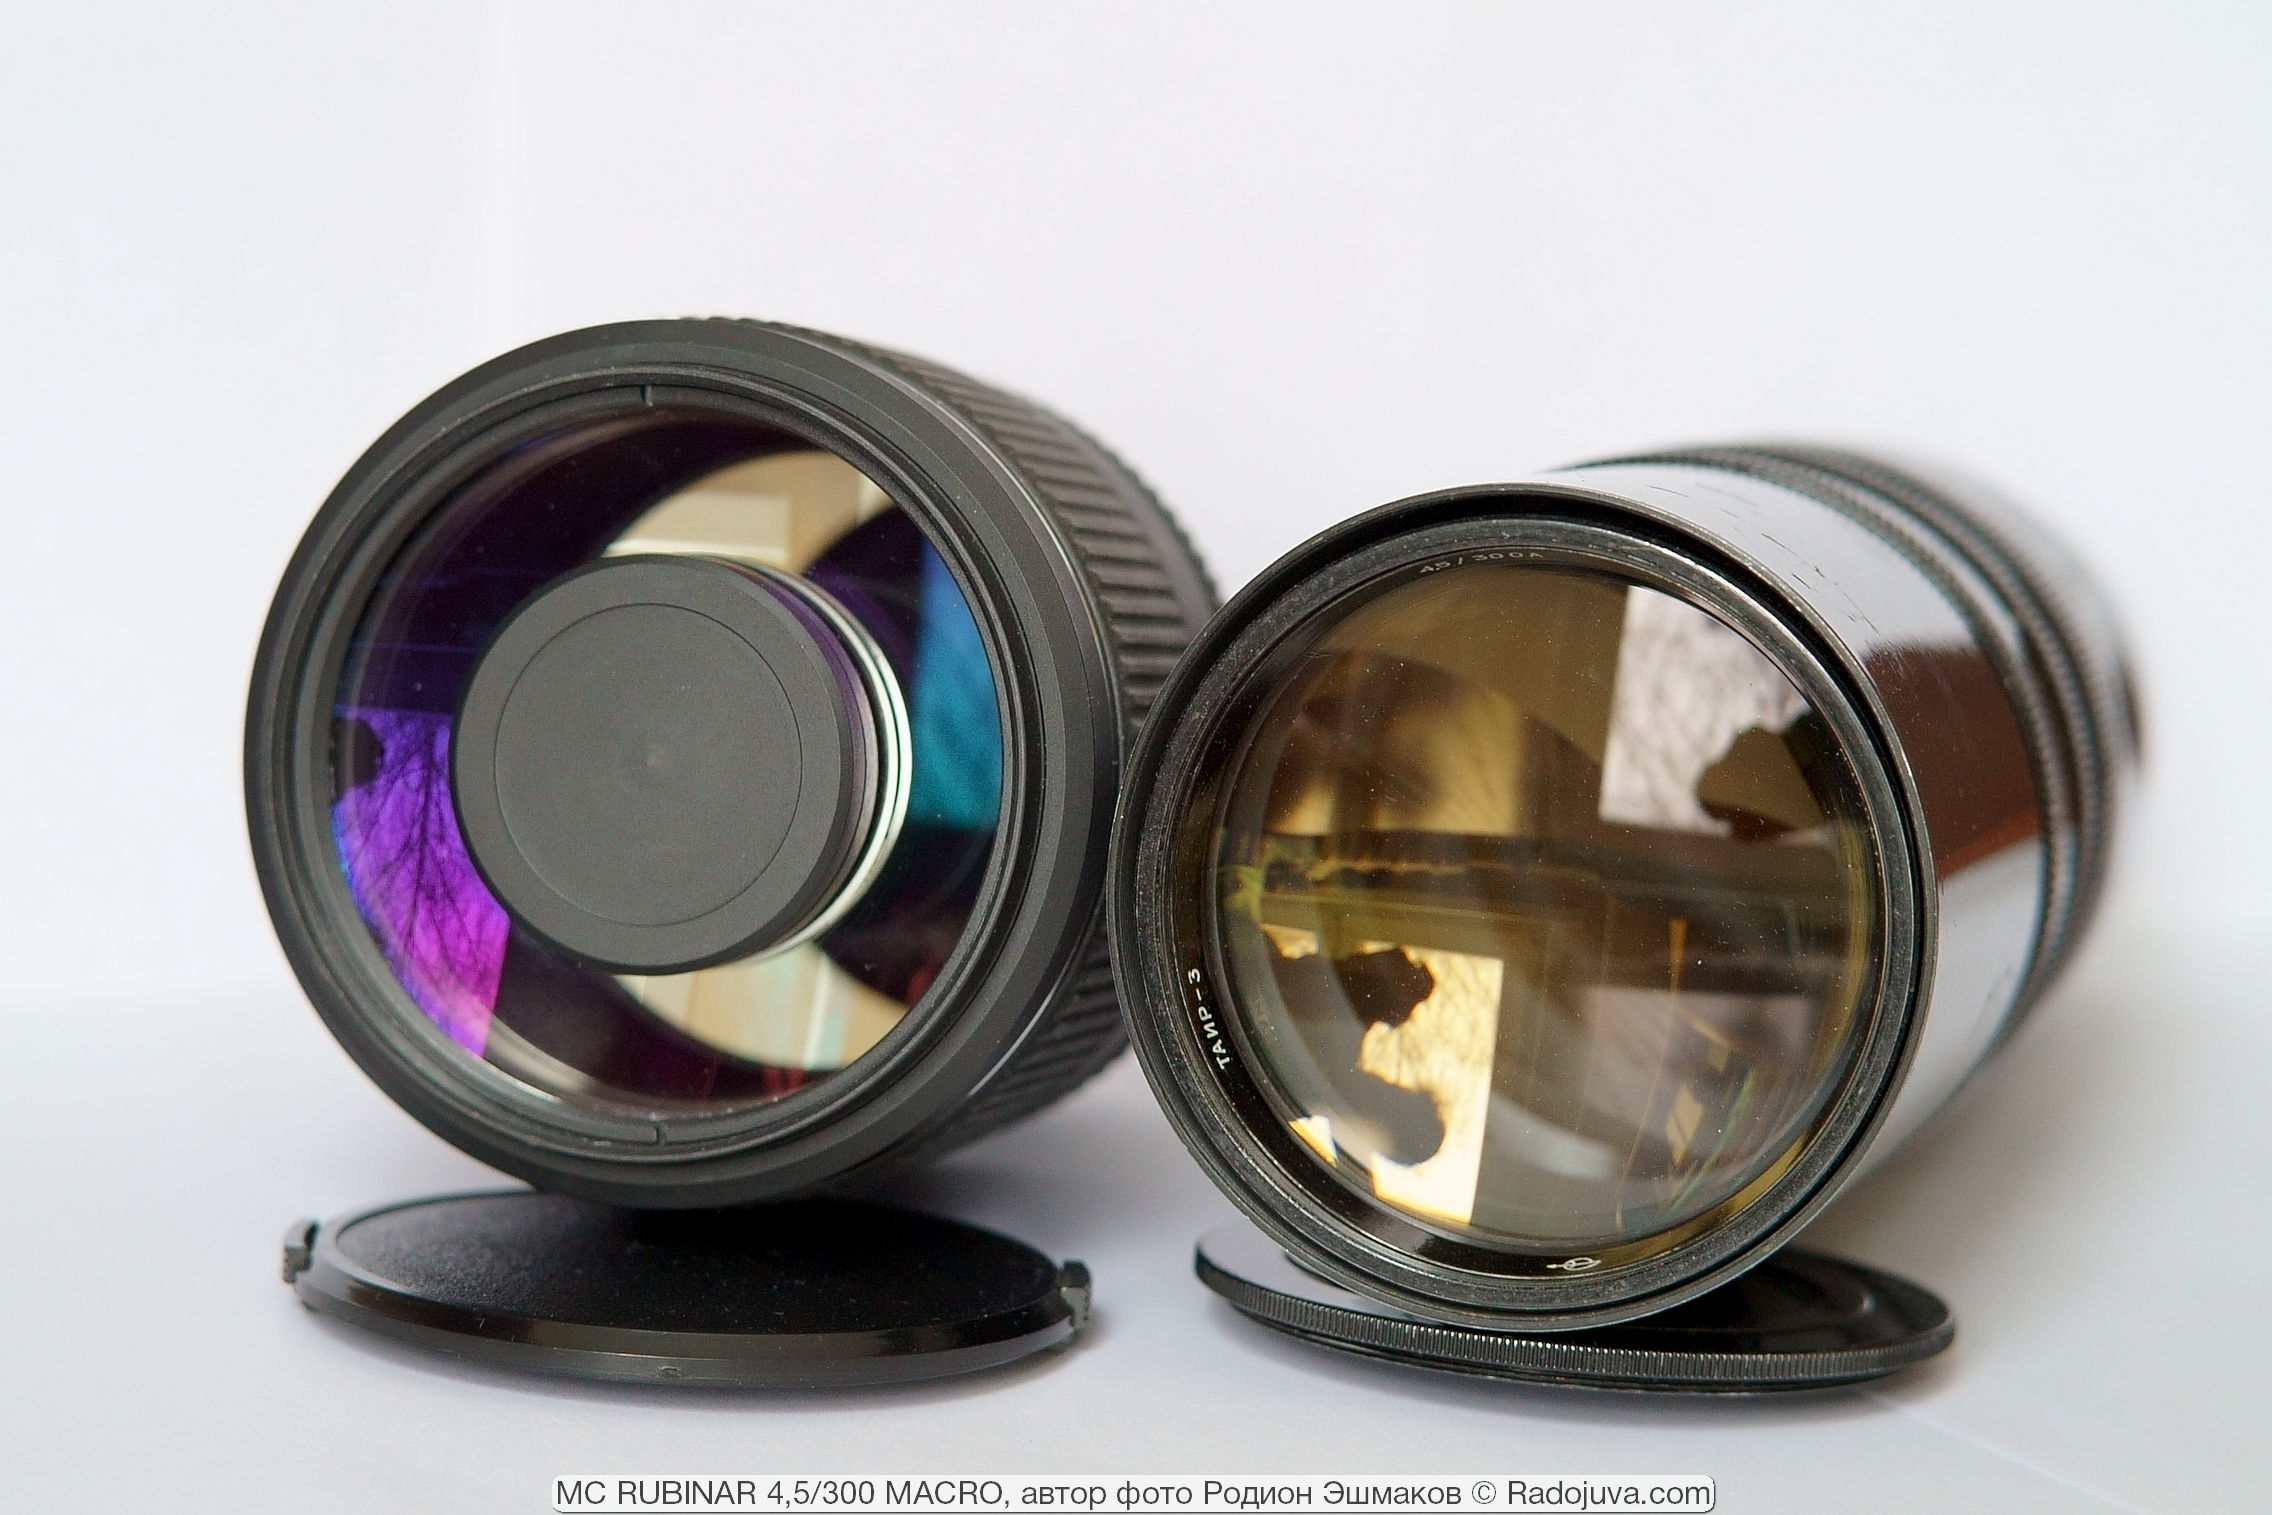 The front lenses Tair-3A 300 / 4.5 and Rubinar 300 / 4.5 have the same diameters, but different working area.